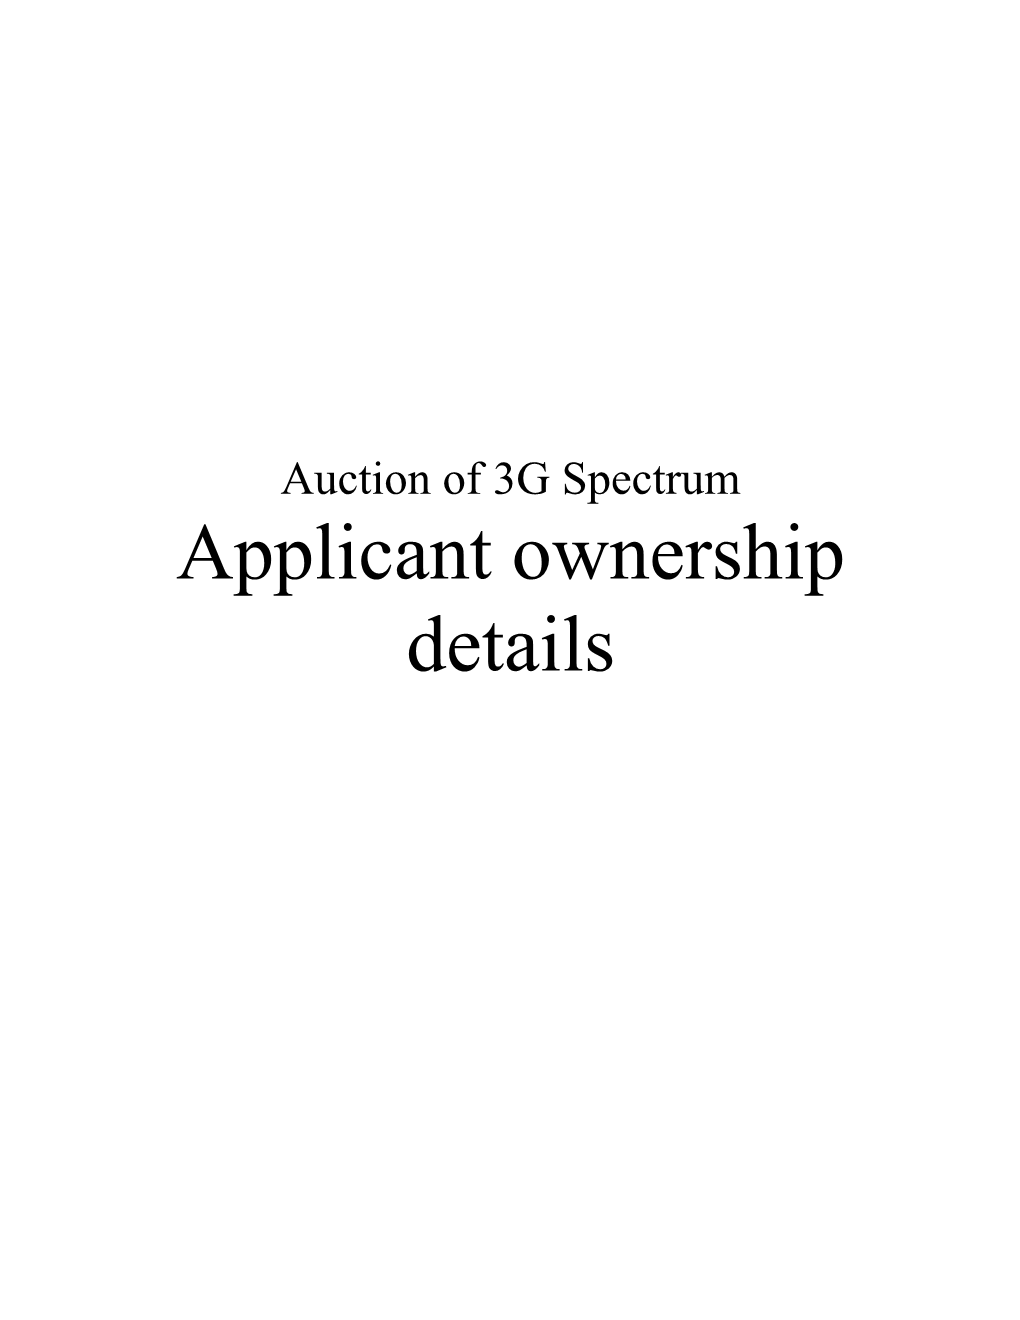 Applicant Ownership Details Auction of 3G Spectrum: Ownership Details of Applicants (As Submitted by the Applicants)